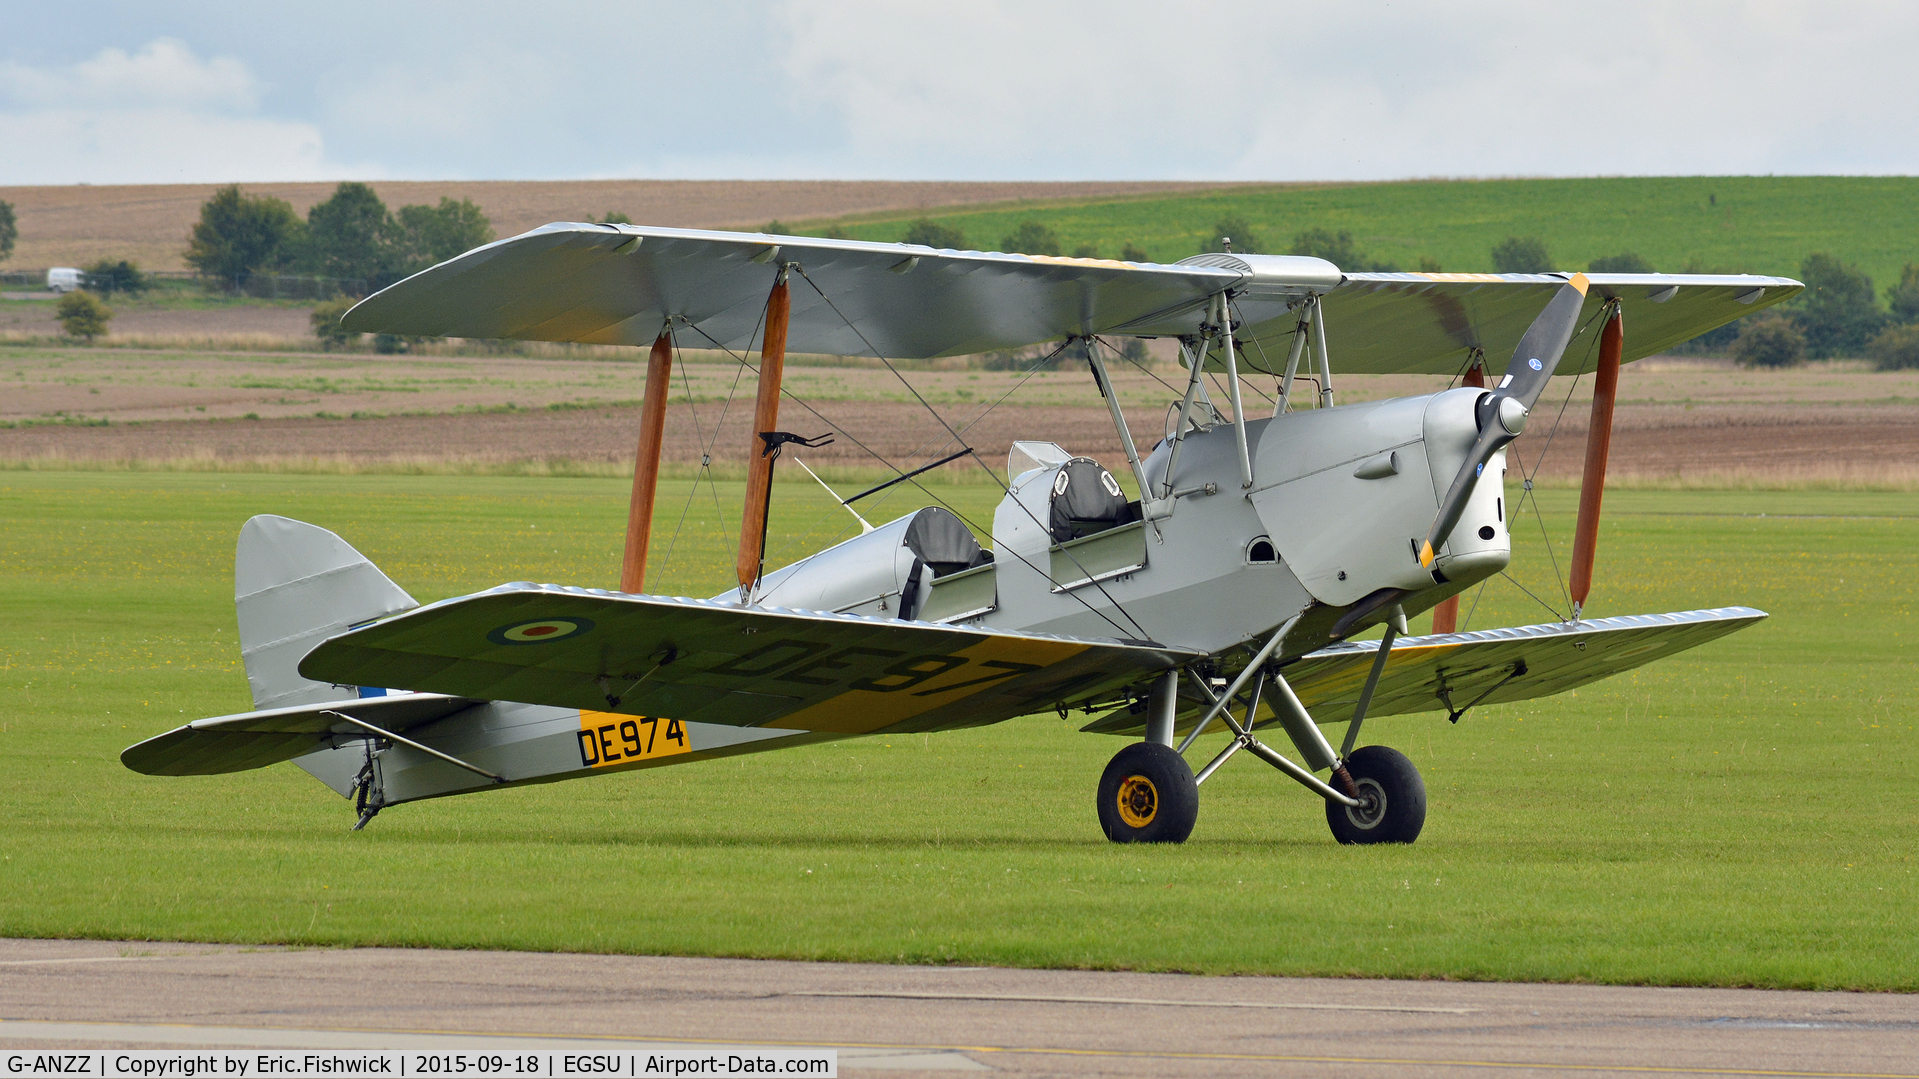 G-ANZZ, 1944 De Havilland DH-82A Tiger Moth II C/N 85834, 3. G-ANZZ - 'The Bishop' on the eve of The Battle of Britain (75th.) Anniversary Air Show, Sept. 2015.